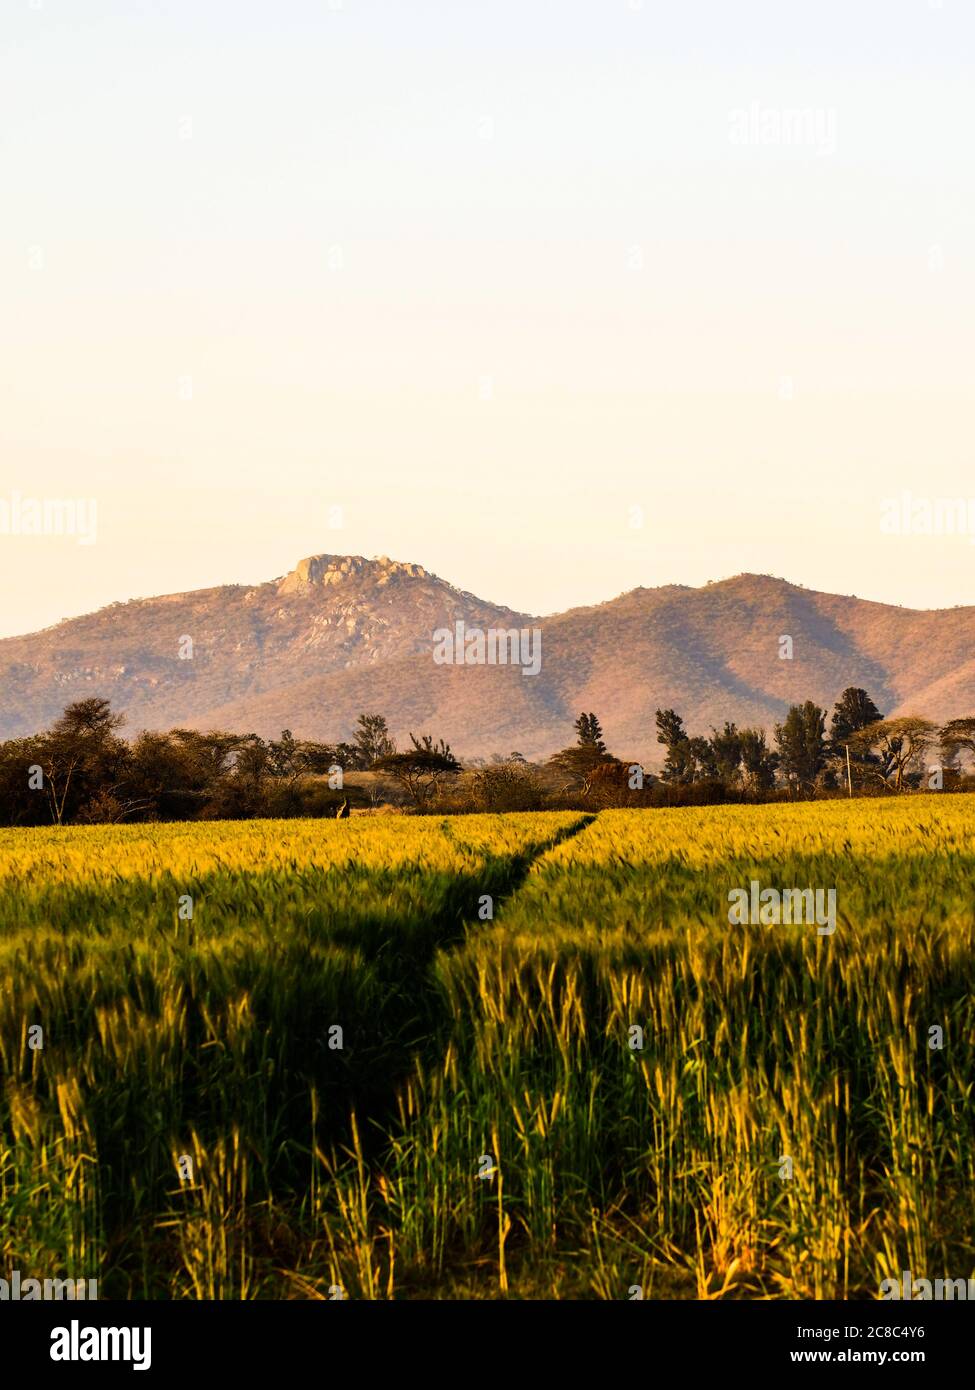 Landscape image of mountains in the background with wheat fore ground Stock Photo